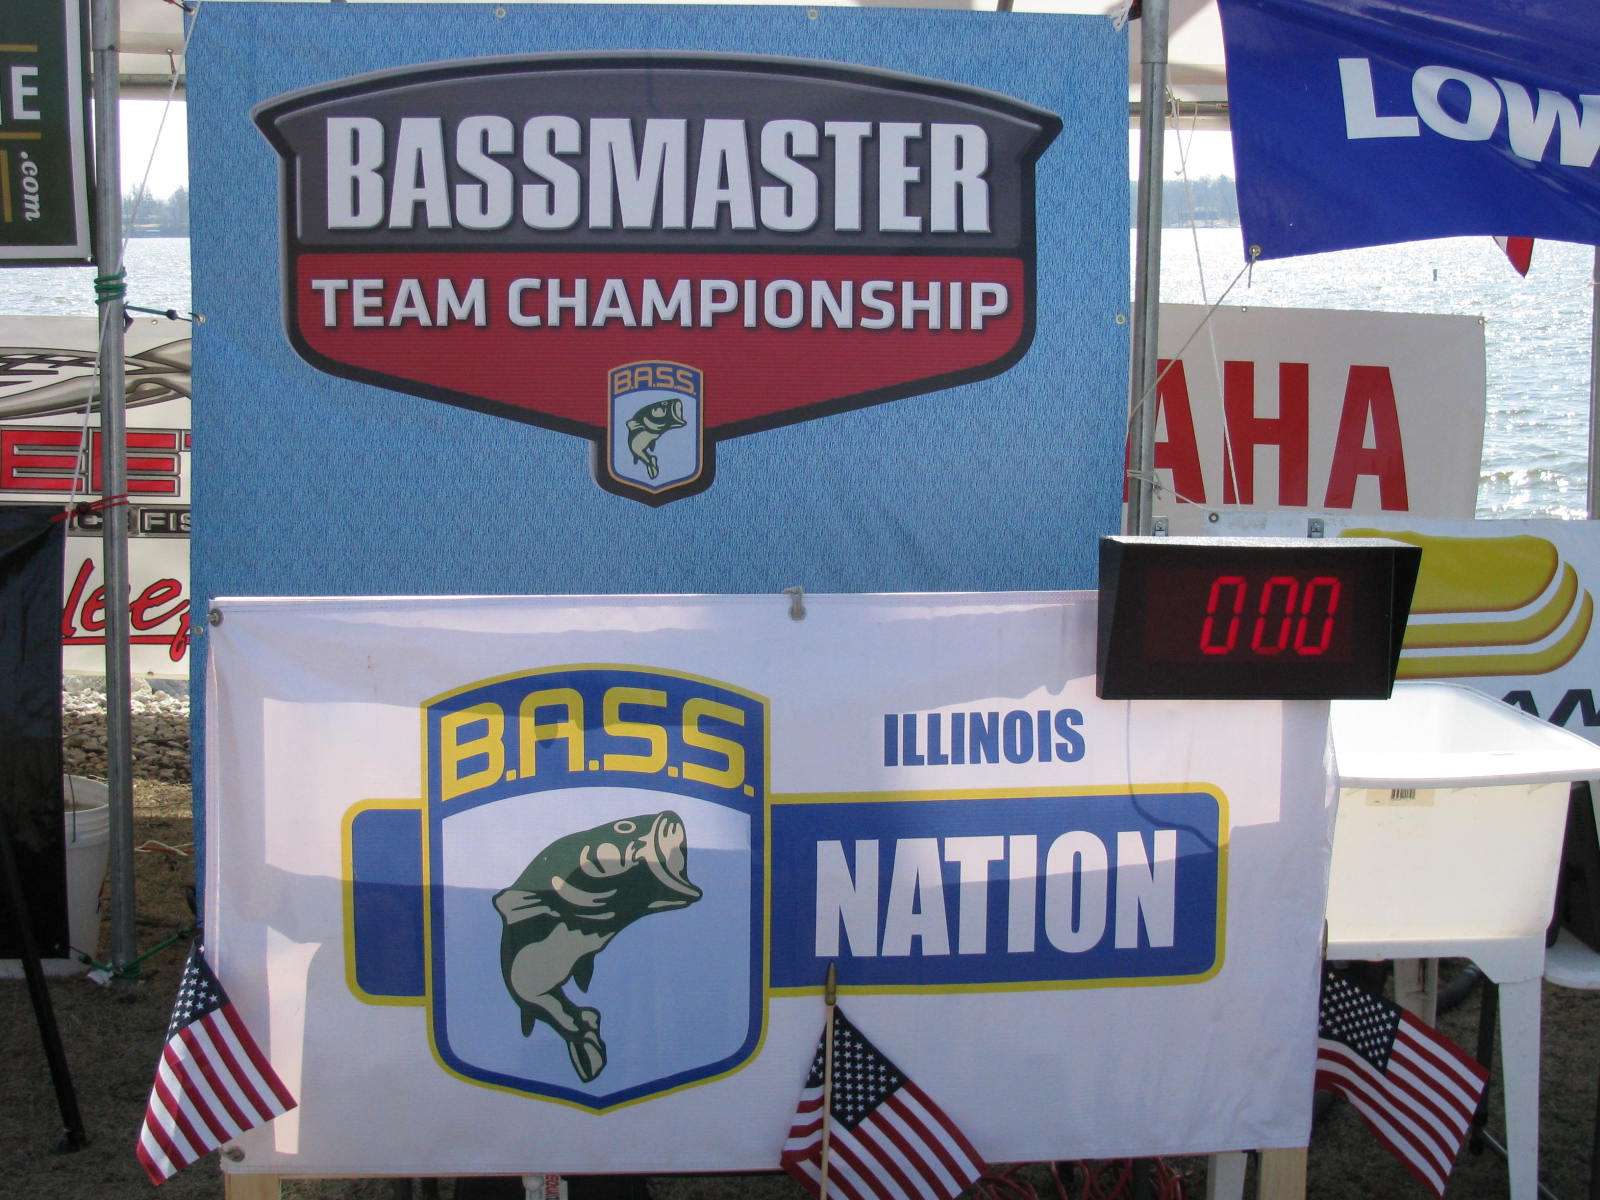 The Illinois B.A.S.S Nation held their first event of the season March 30th on Lake Springfield. 